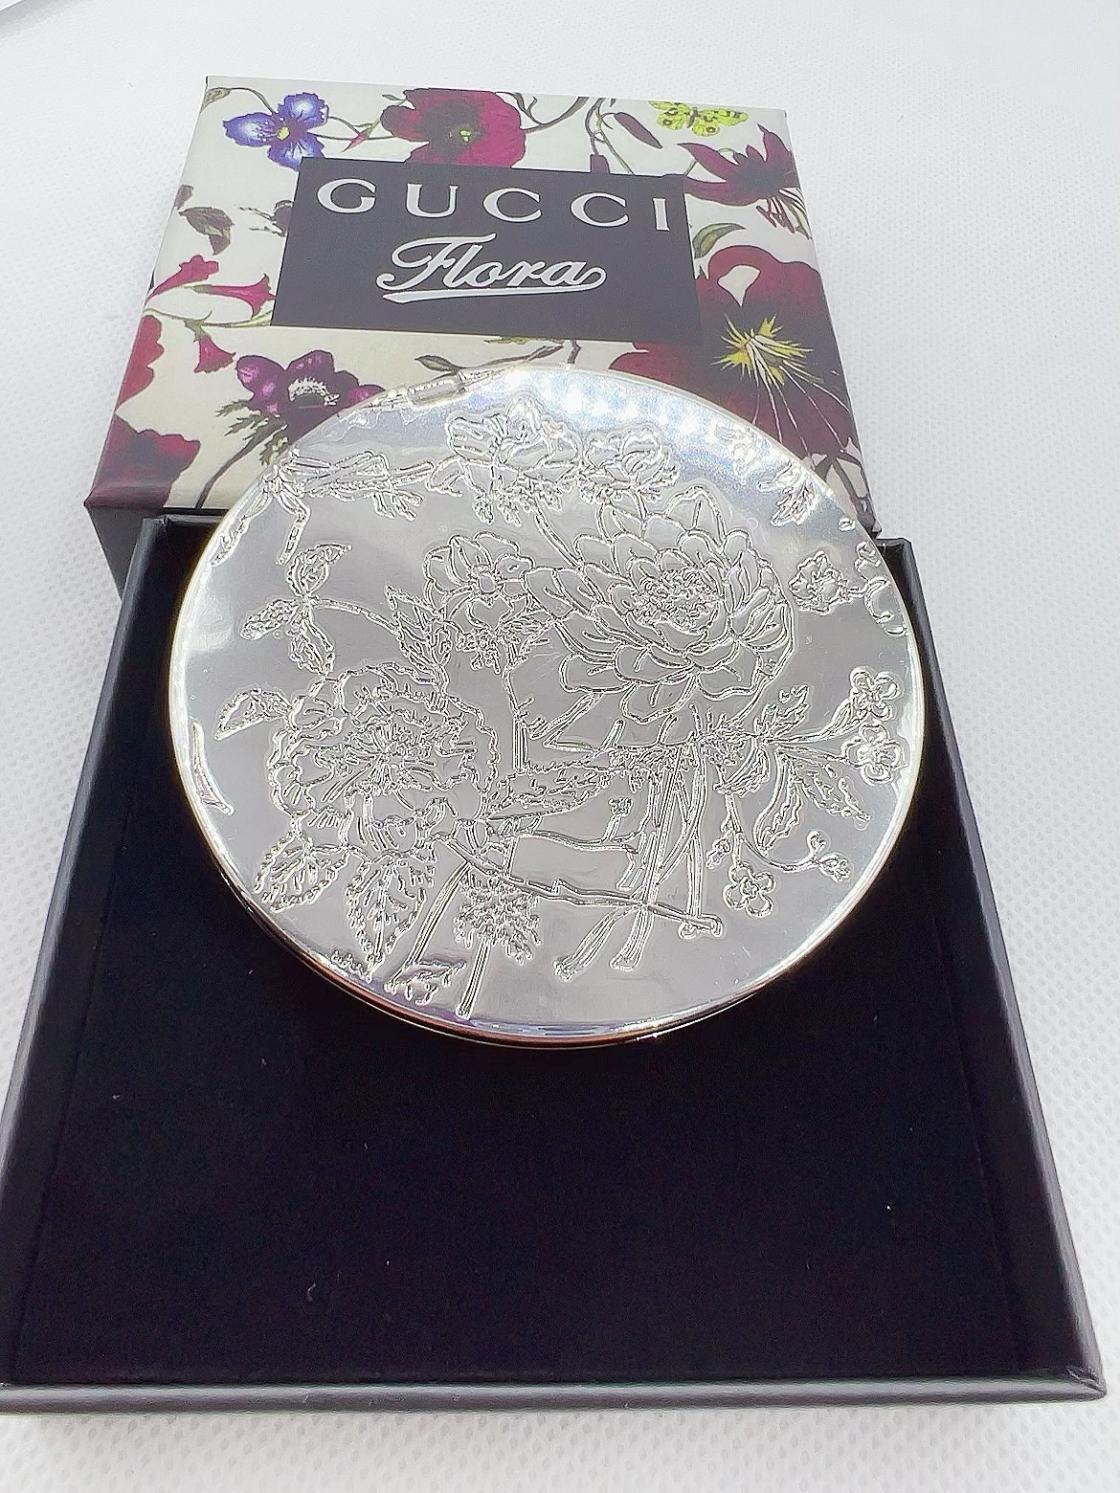 Gucci Flora NEW Double-sided pocket MakeUp Mirror in Box in Silver color